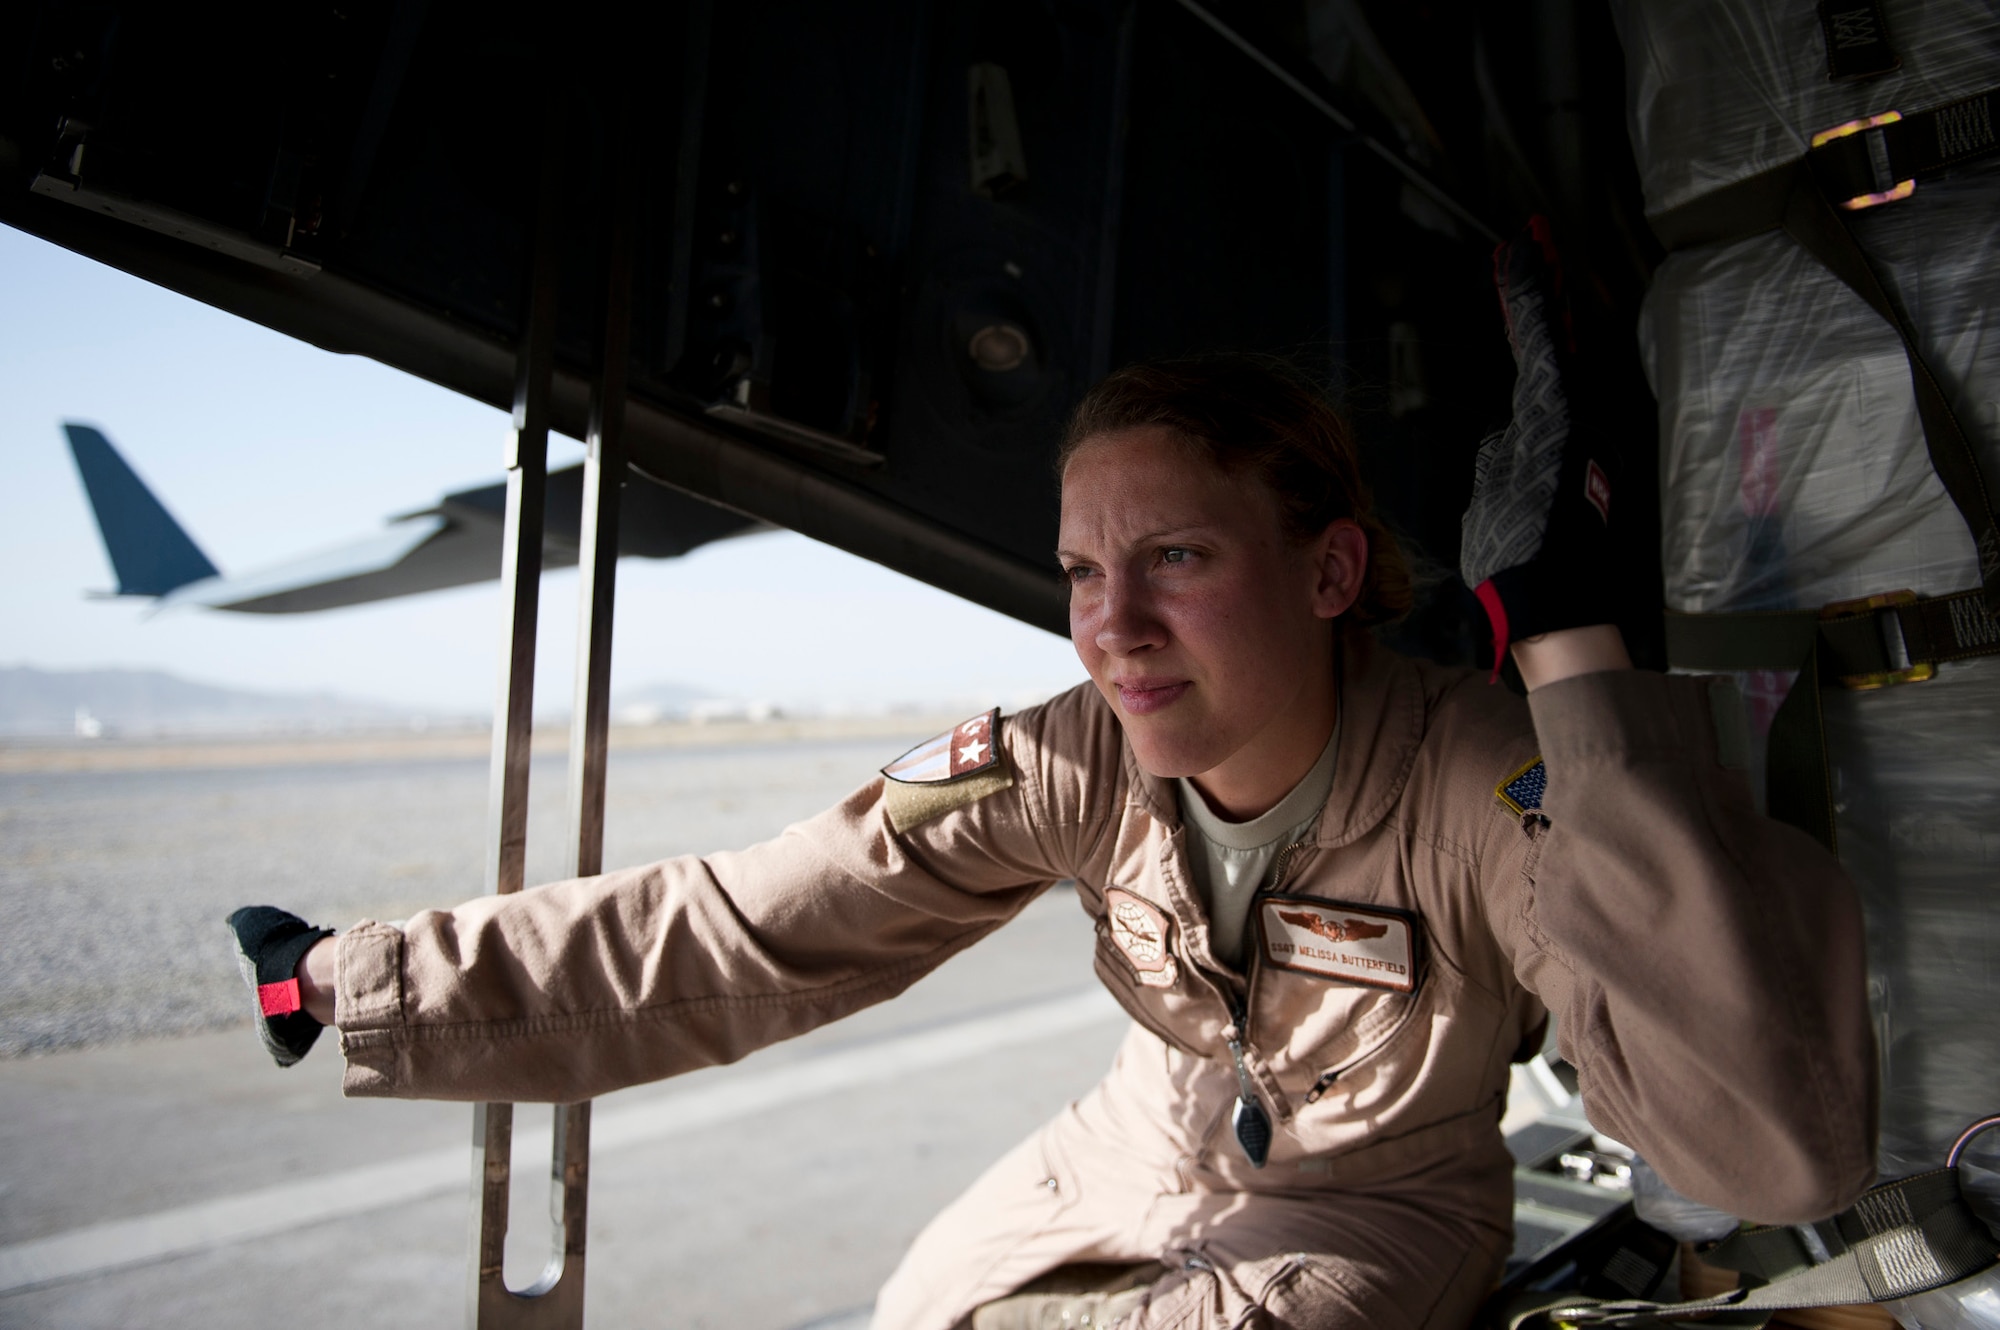 Staff Sgt. Melissa Butterfield, an 817th Expeditionary Airlift Squadron loadmaster, directs equipment to unload a C-17 Globemaster III aircraft Aug. 18, 2011, at Kandahar Air Field, Afghanistan, during a mission to transport equipment and supplies from Incirlik Air Base, Turkey. Loadmasters not only ensure the cargo is properly secured during flight, but also help with the unloading. (U.S. Air Force photo by Tech. Sgt. Michael B. Keller/Released)